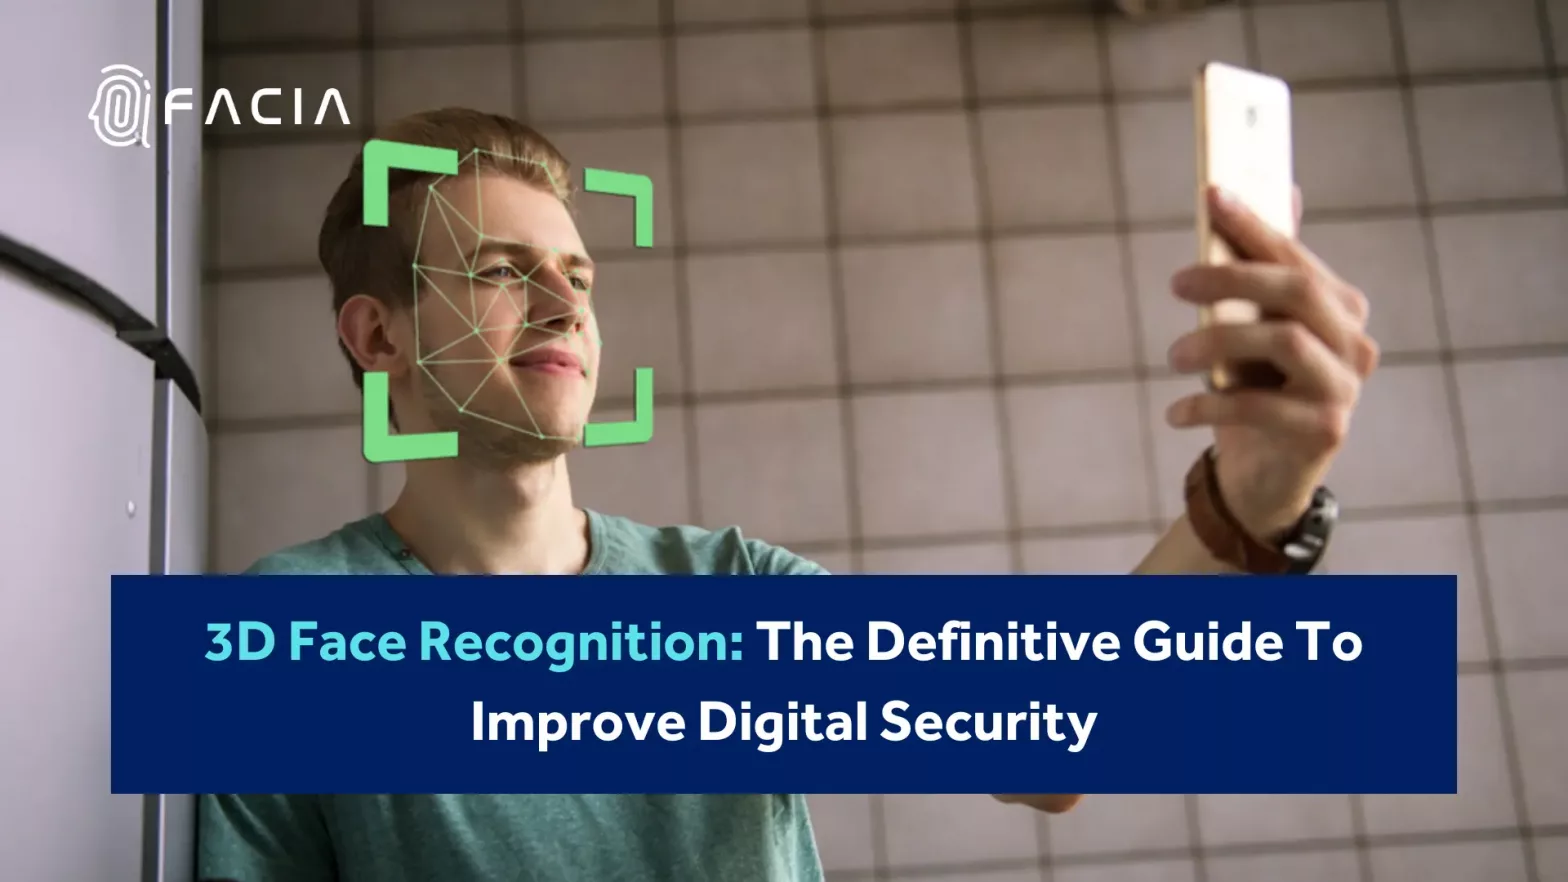 3D Face Recognition: The Definitive Guide To Improve Digital Security